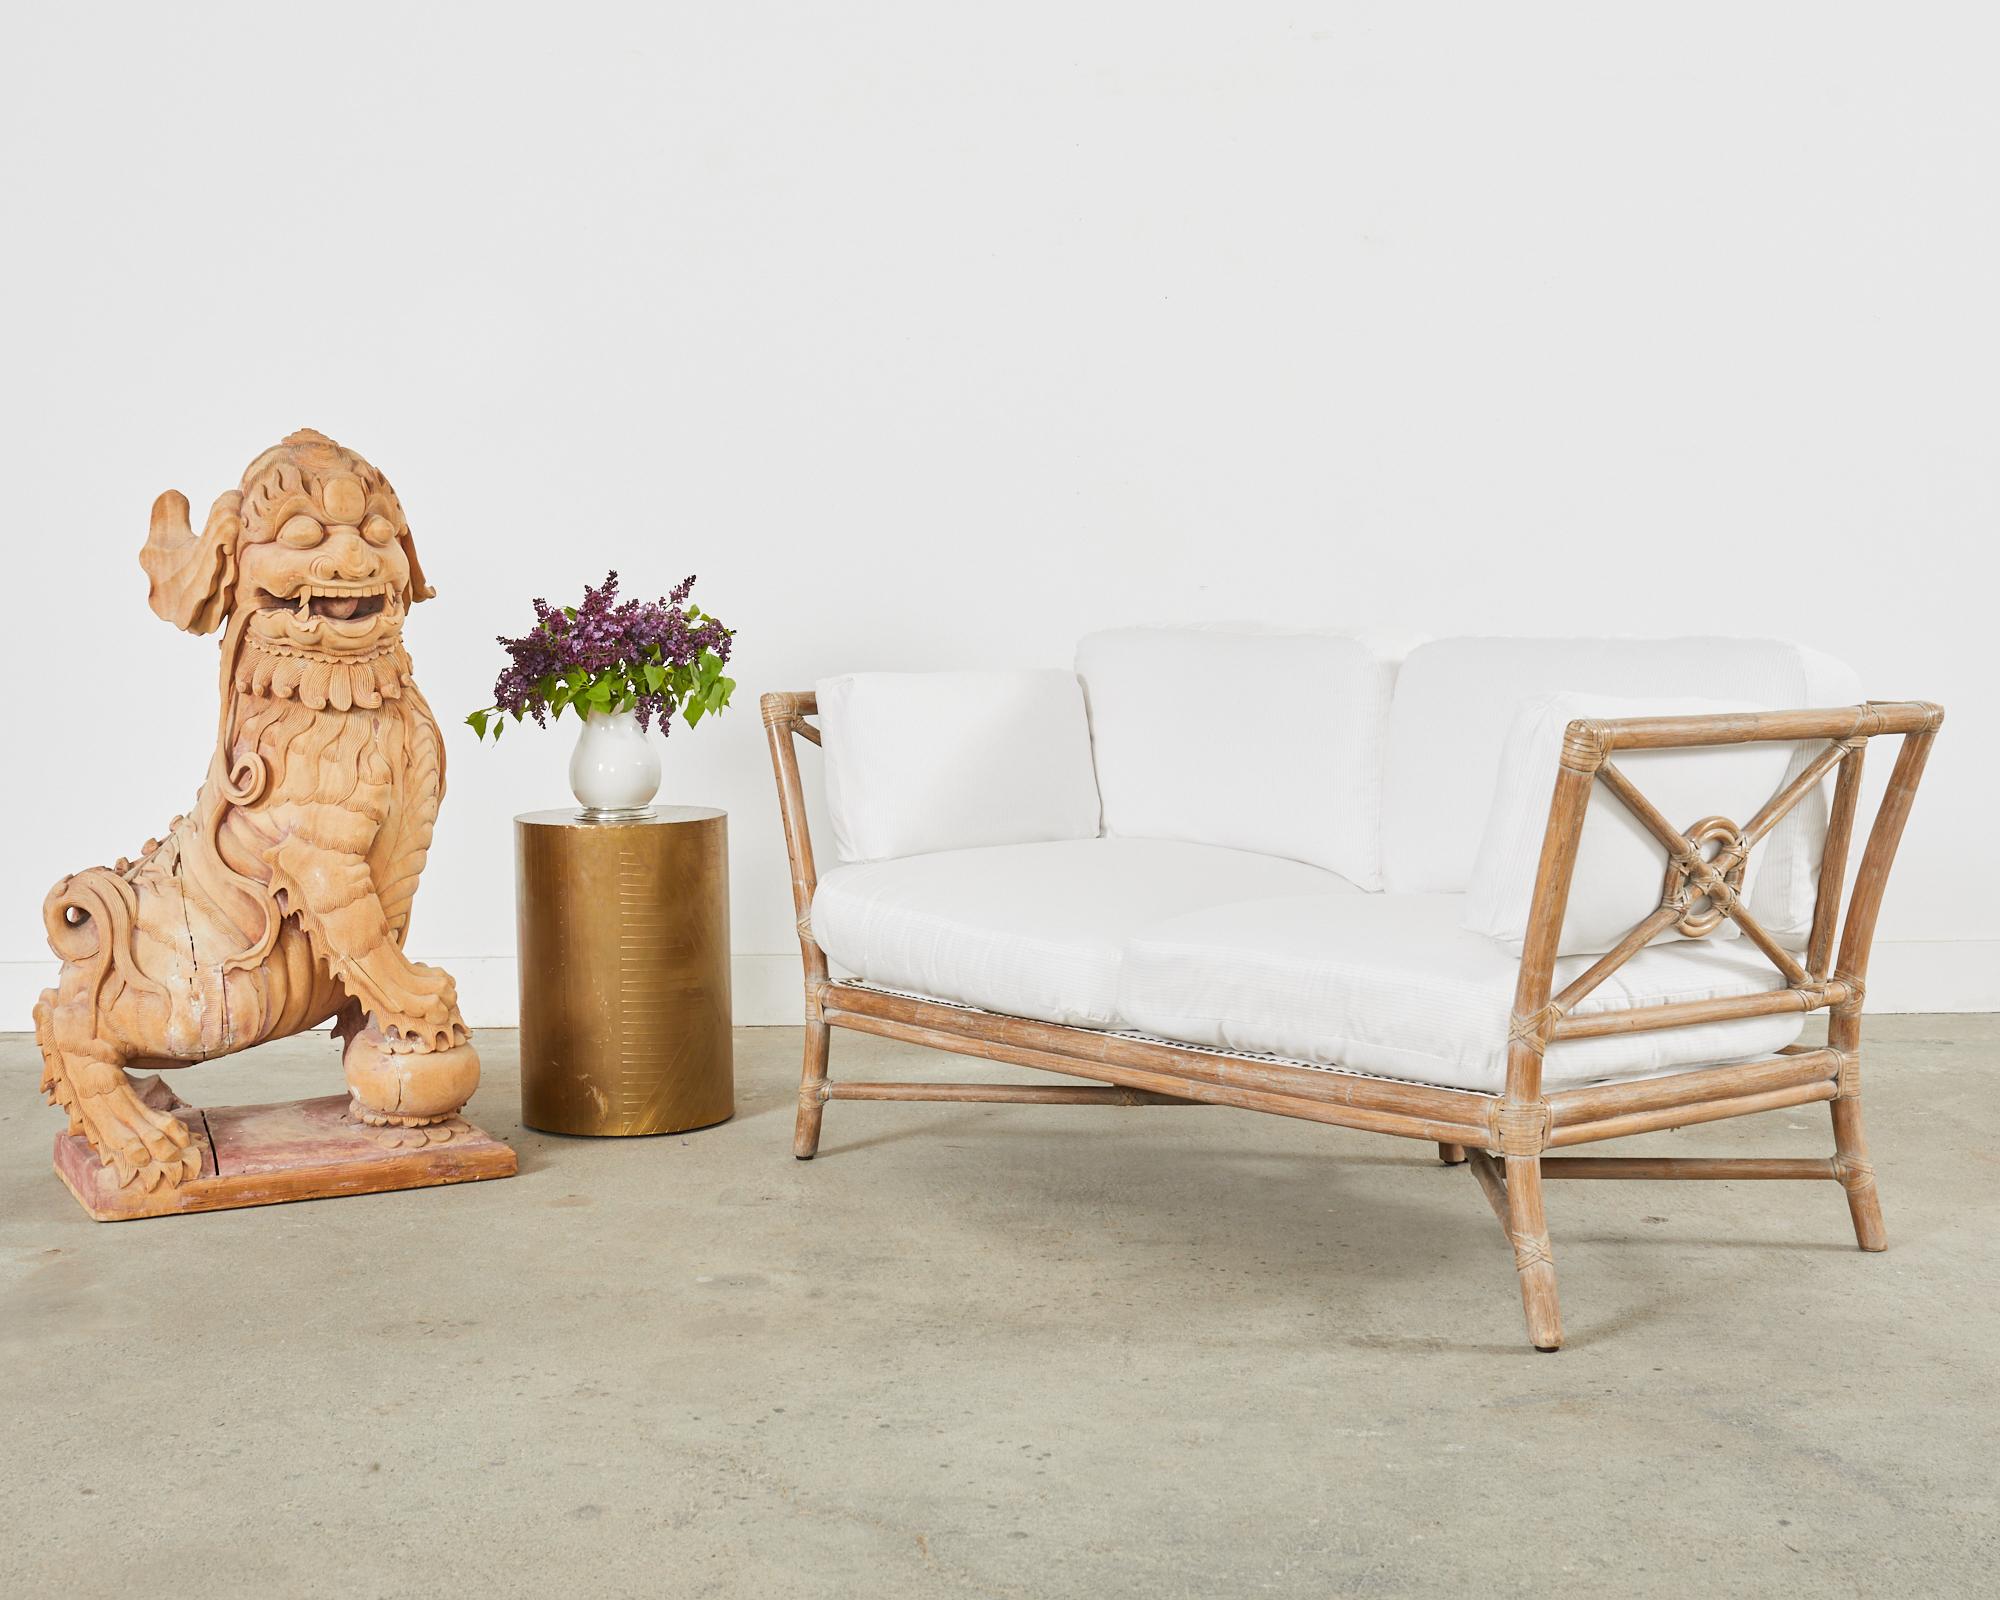 Genuine McGuire rattan sofa or settee made in the California coastal organic modern style. The settee features an iconic target motif design on the back and sides designed by Elinor McGuire. Constructed from thick rattan poles with an intentionally